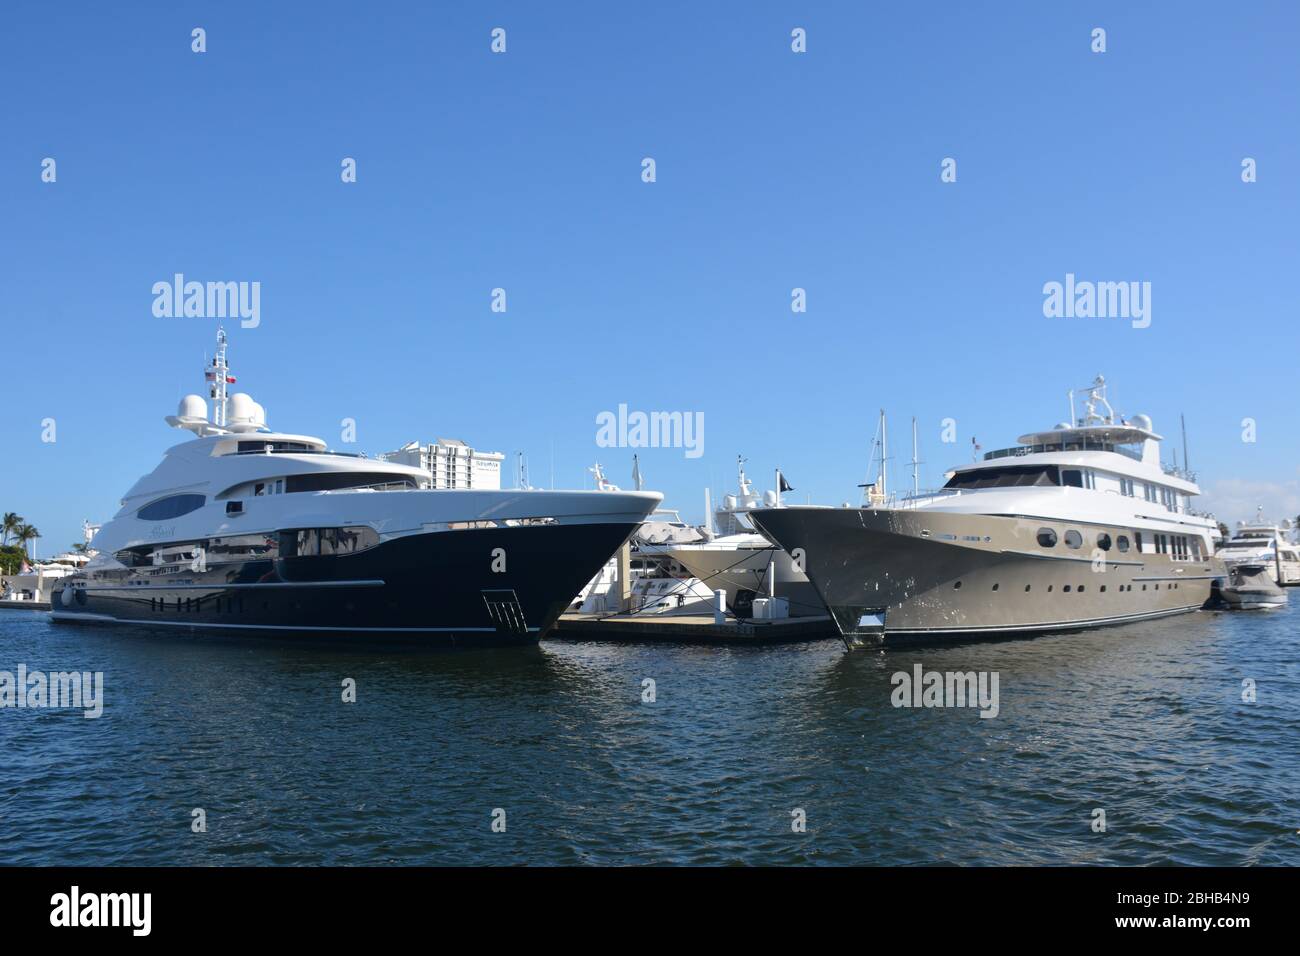 Views from a water taxi trip taking in Fort Lauderdale's Intracoastal Waterway, a canal system featuring superyachts and luxury real estate. Stock Photo